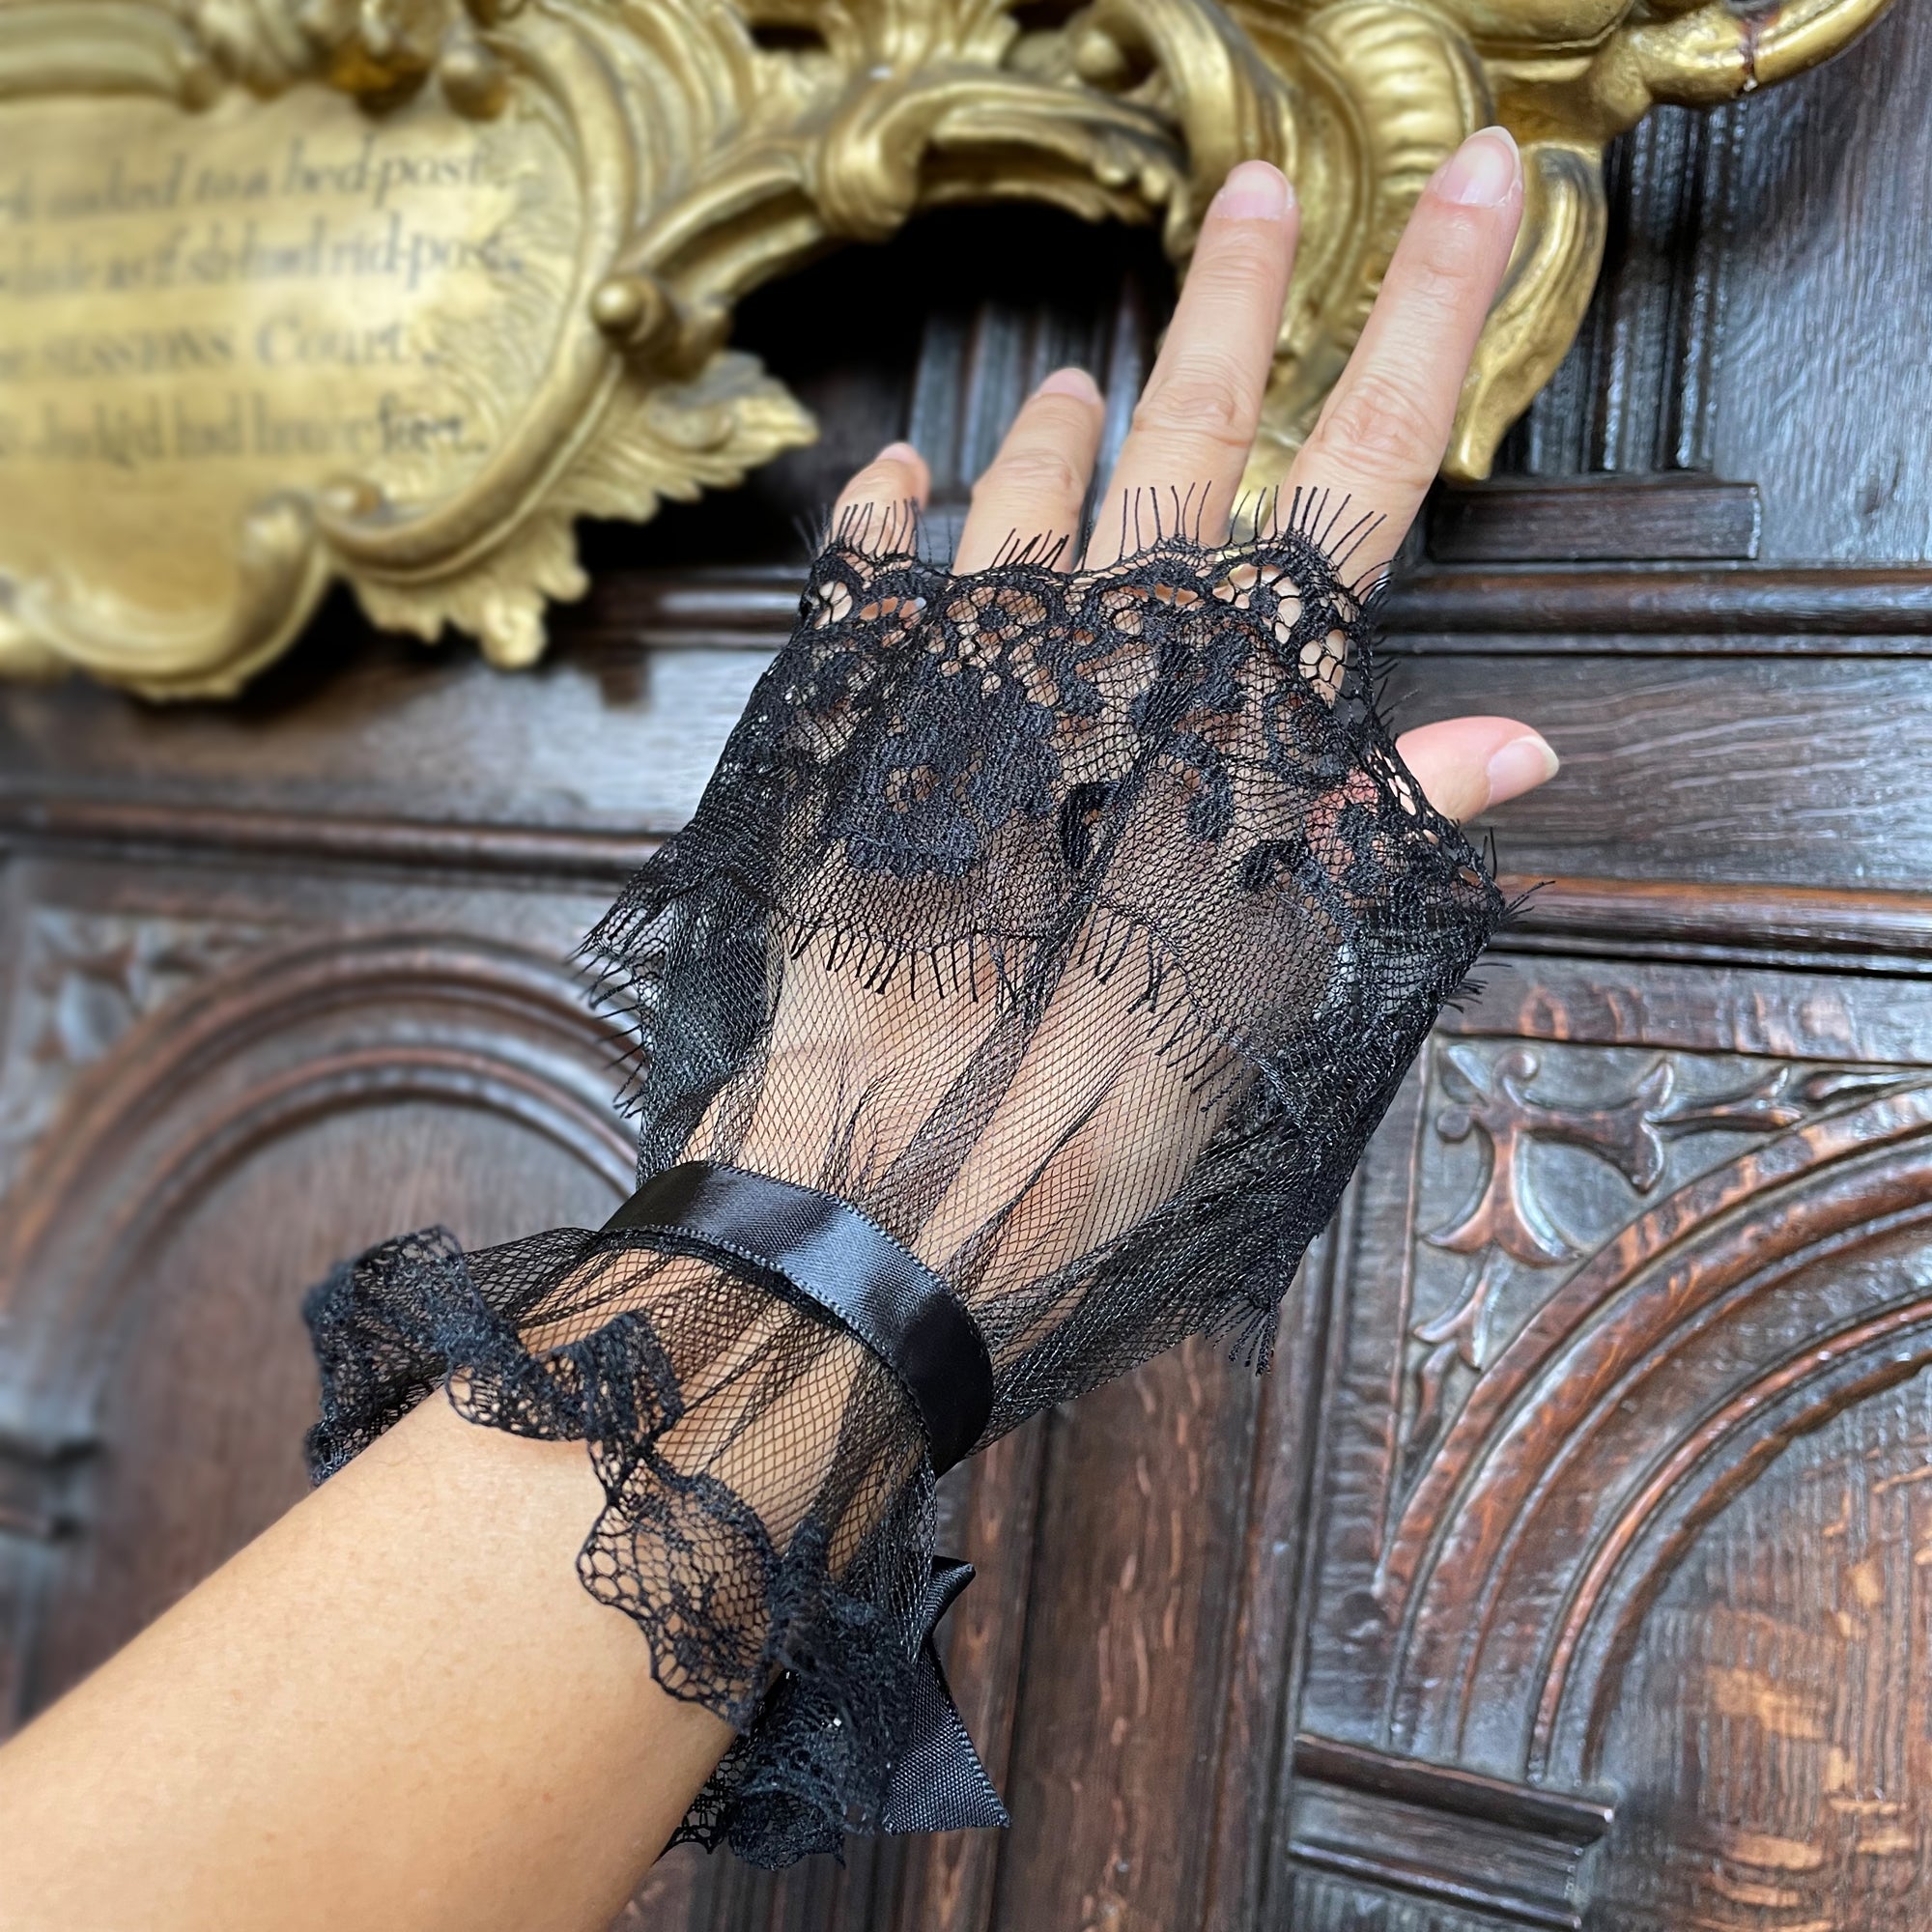 Brand new lace gloves collection in lace cuff bracelet style - by One Curtain Road